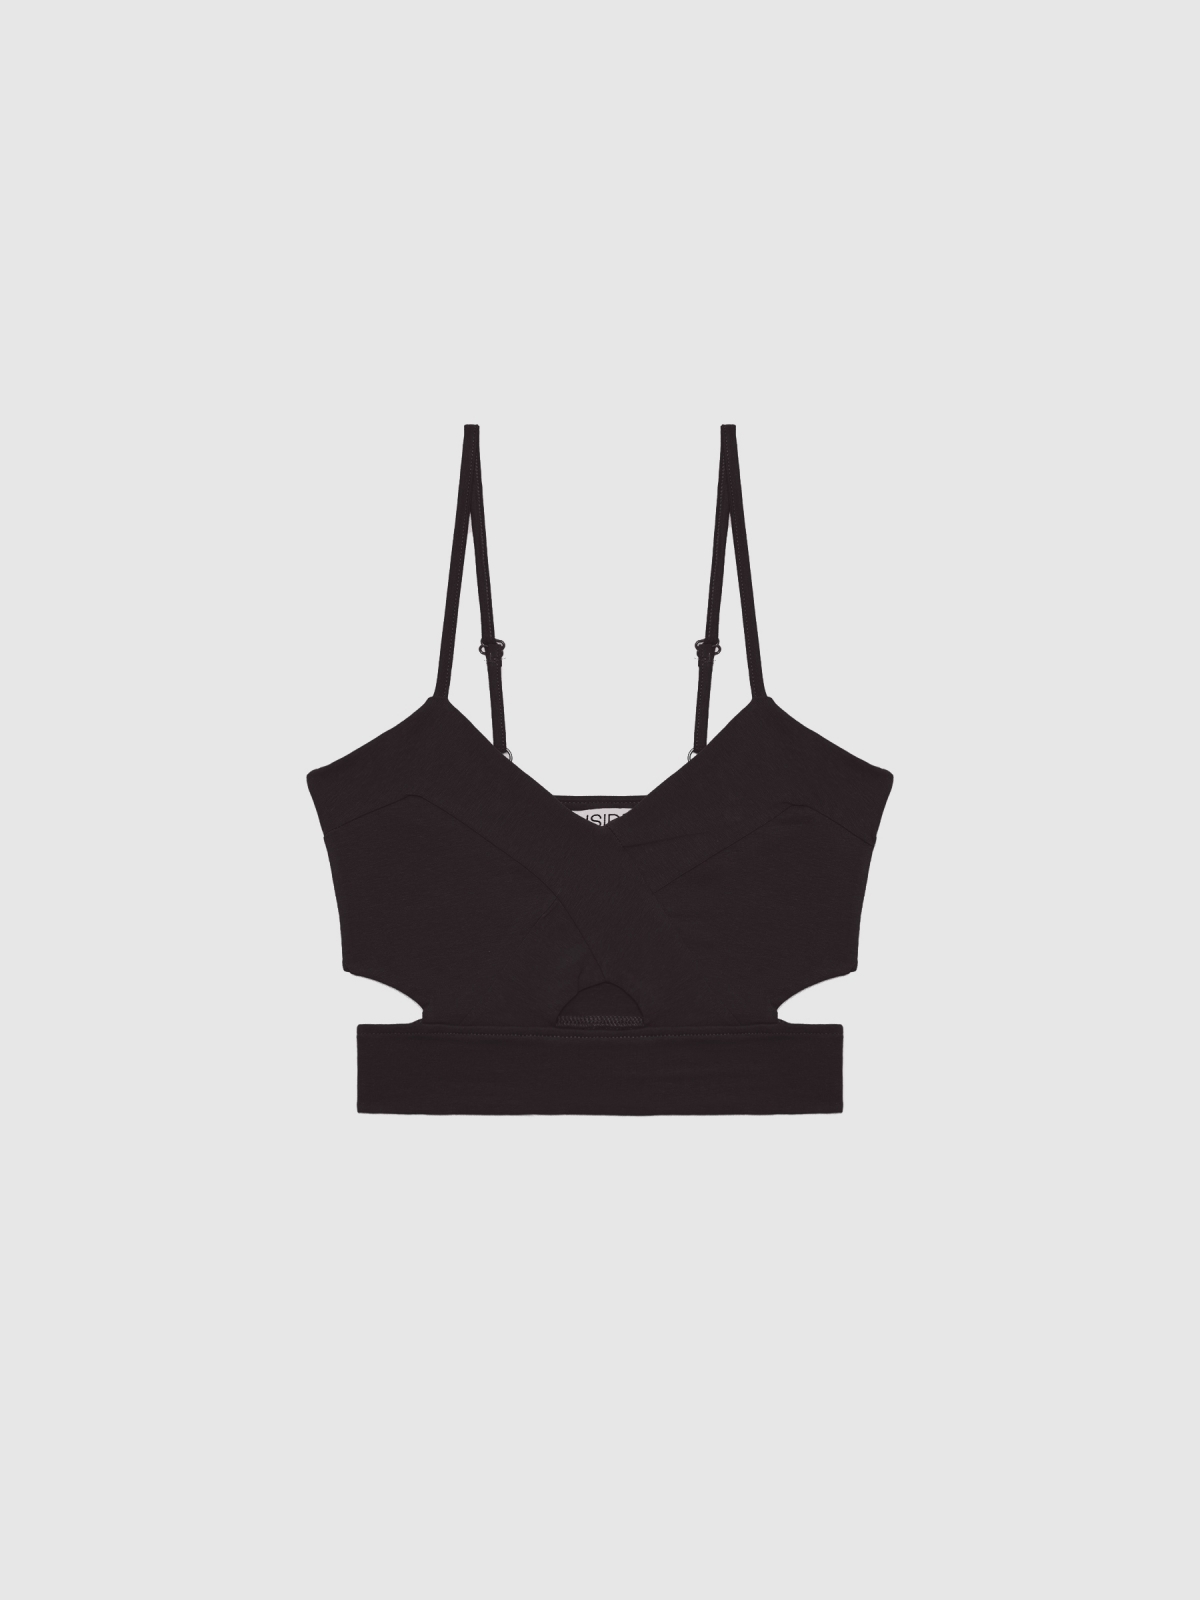  Top cropped cut out black